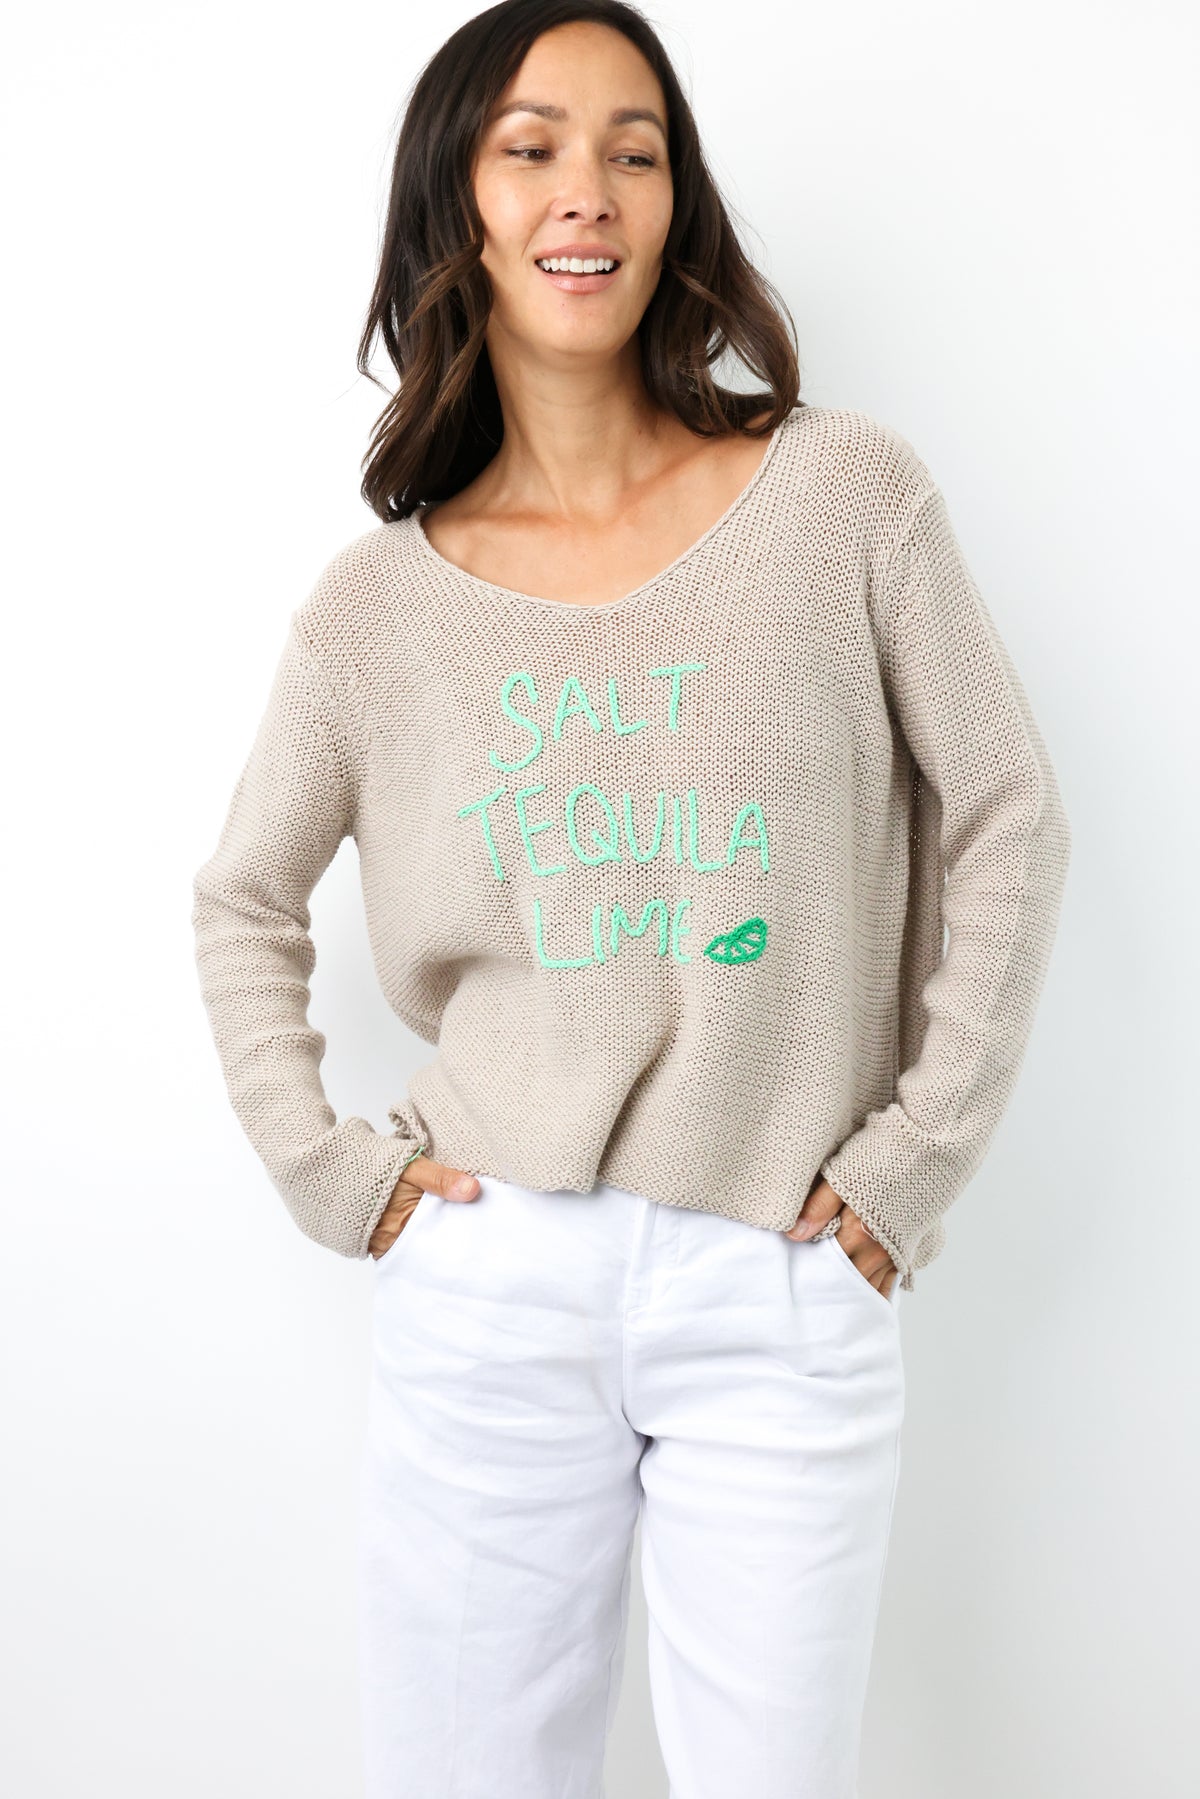 Salt Tequila Lime Sweater